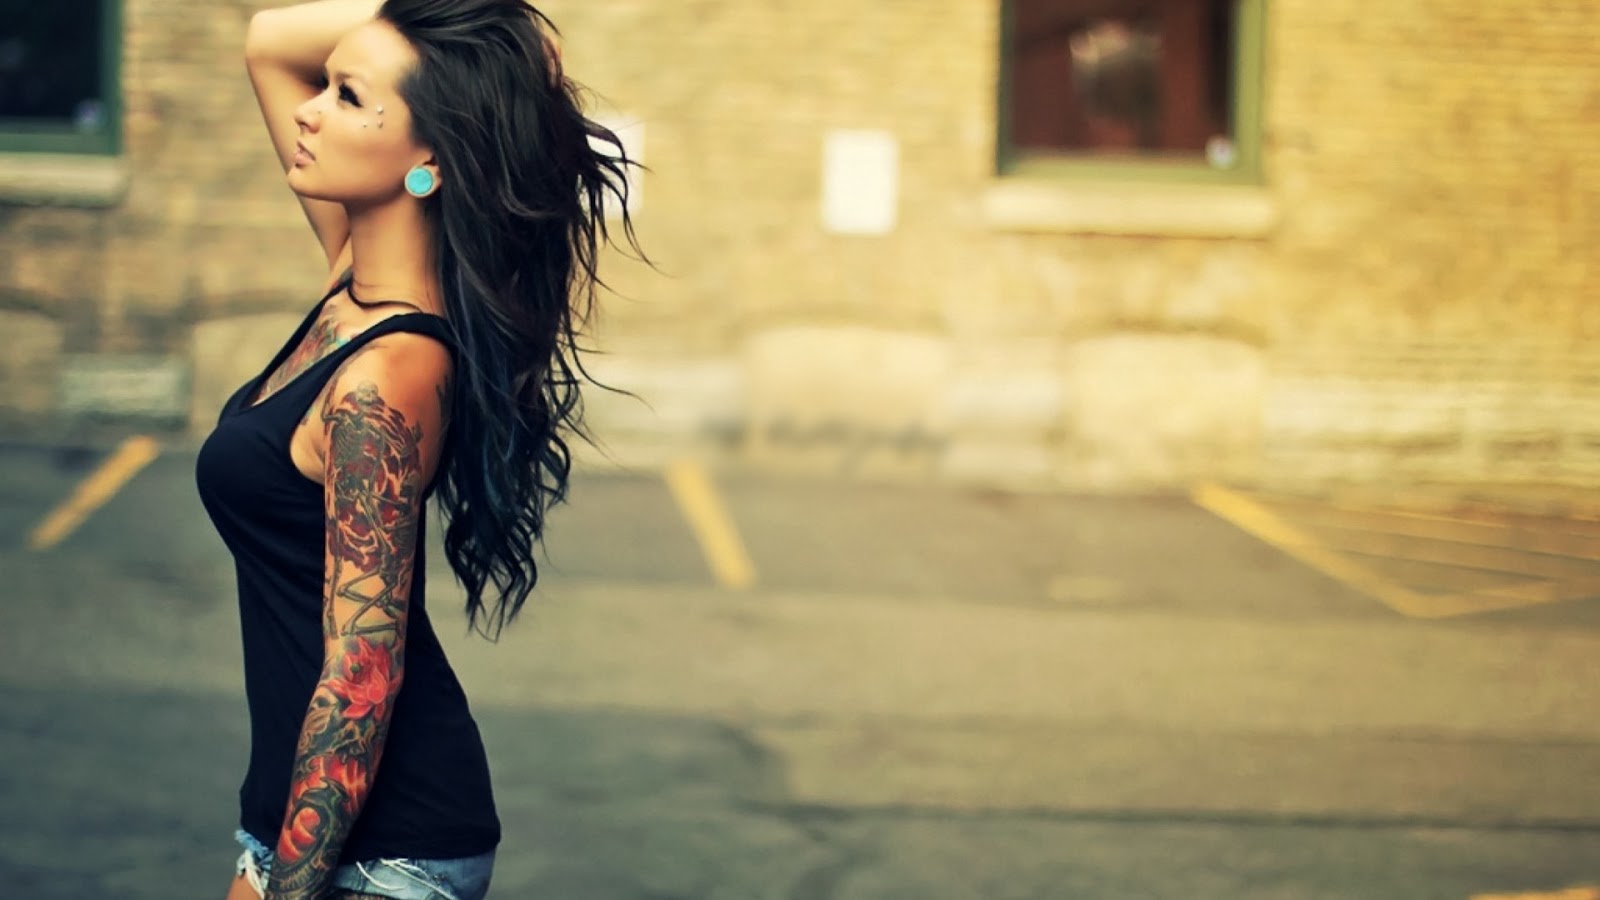 Tattoos Girls HD Wallpapers Deep HD Wallpapers For You HD